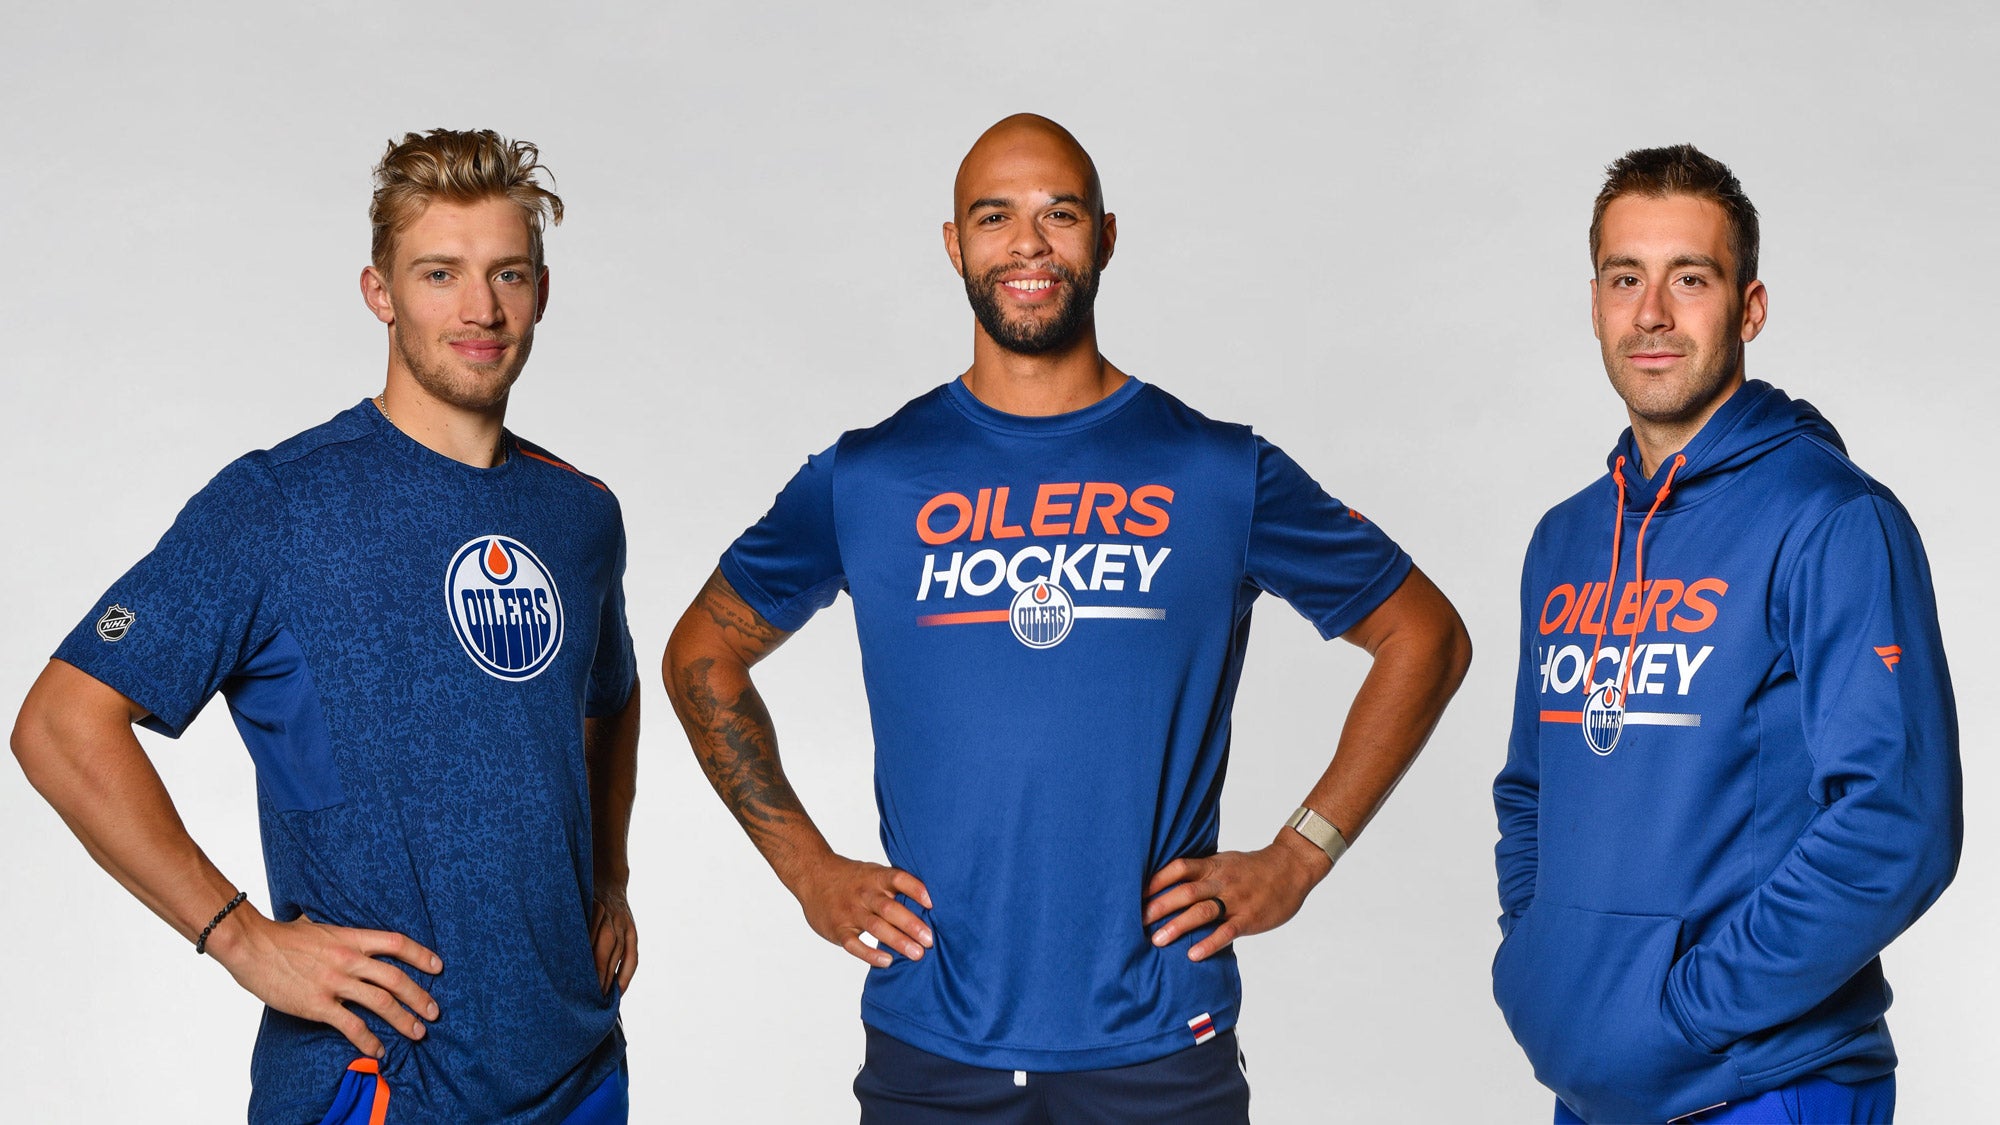 Edmonton Oilers on X: The new home & road jerseys are on display at  the #Oilers Store in Kingsway Mall. Stop by to check them out &  pre-order your own!  /